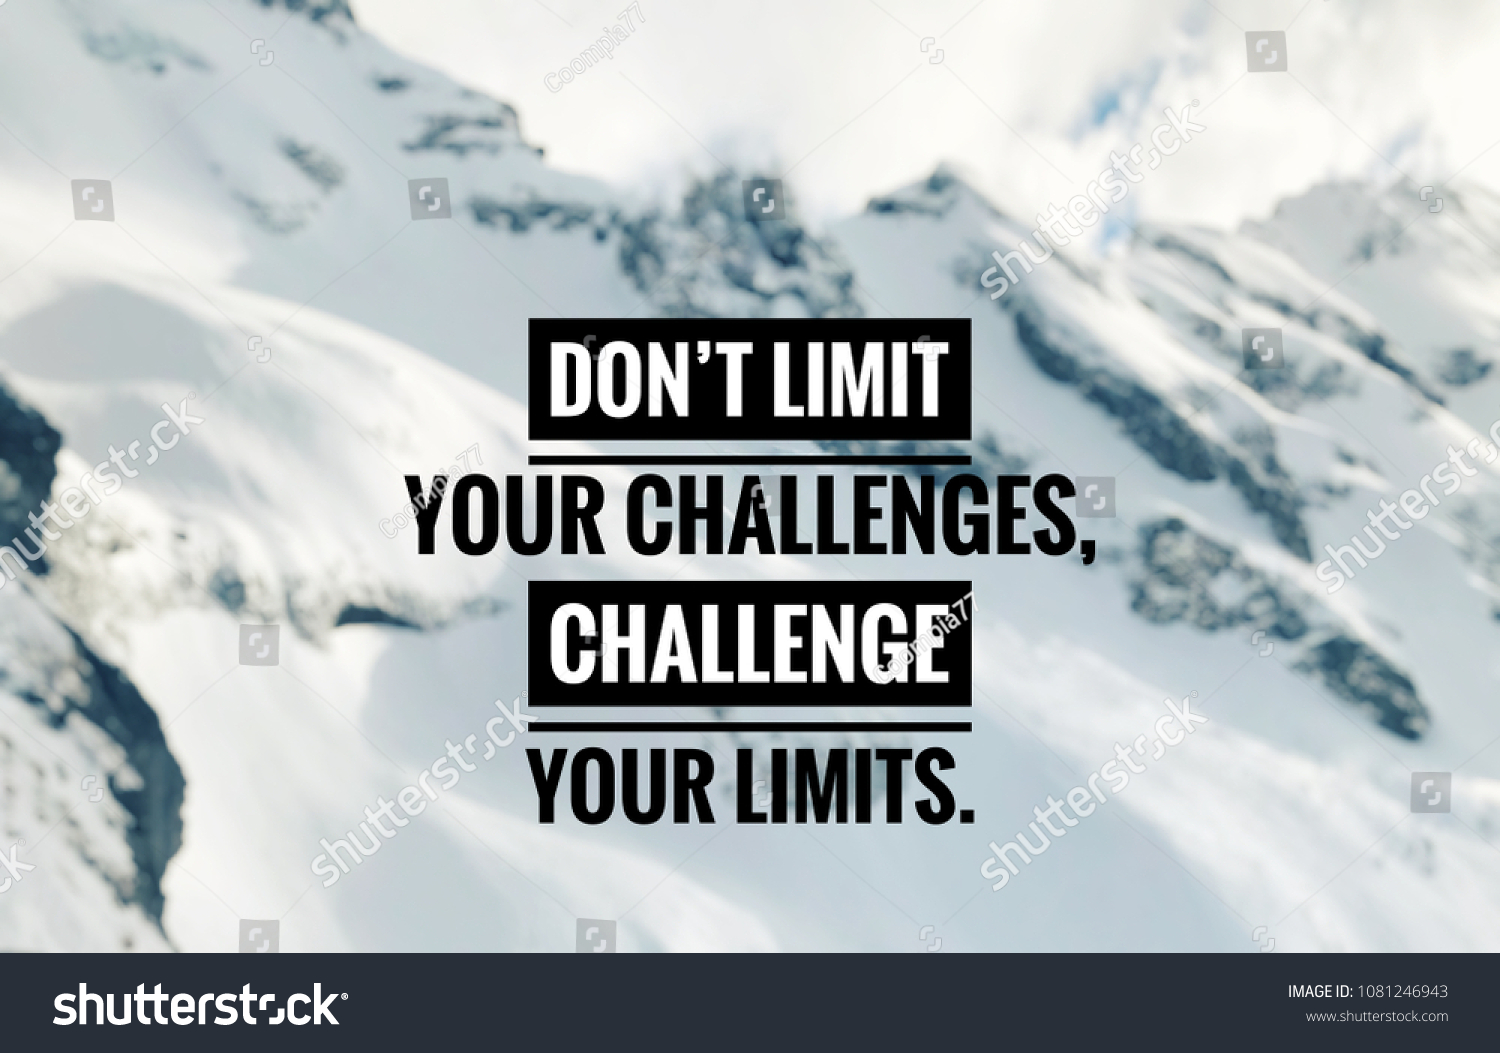 Motivational and inspirational quote - Don’t limit your challenges, challenge your limits. With blurred vintage styled background. #1081246943